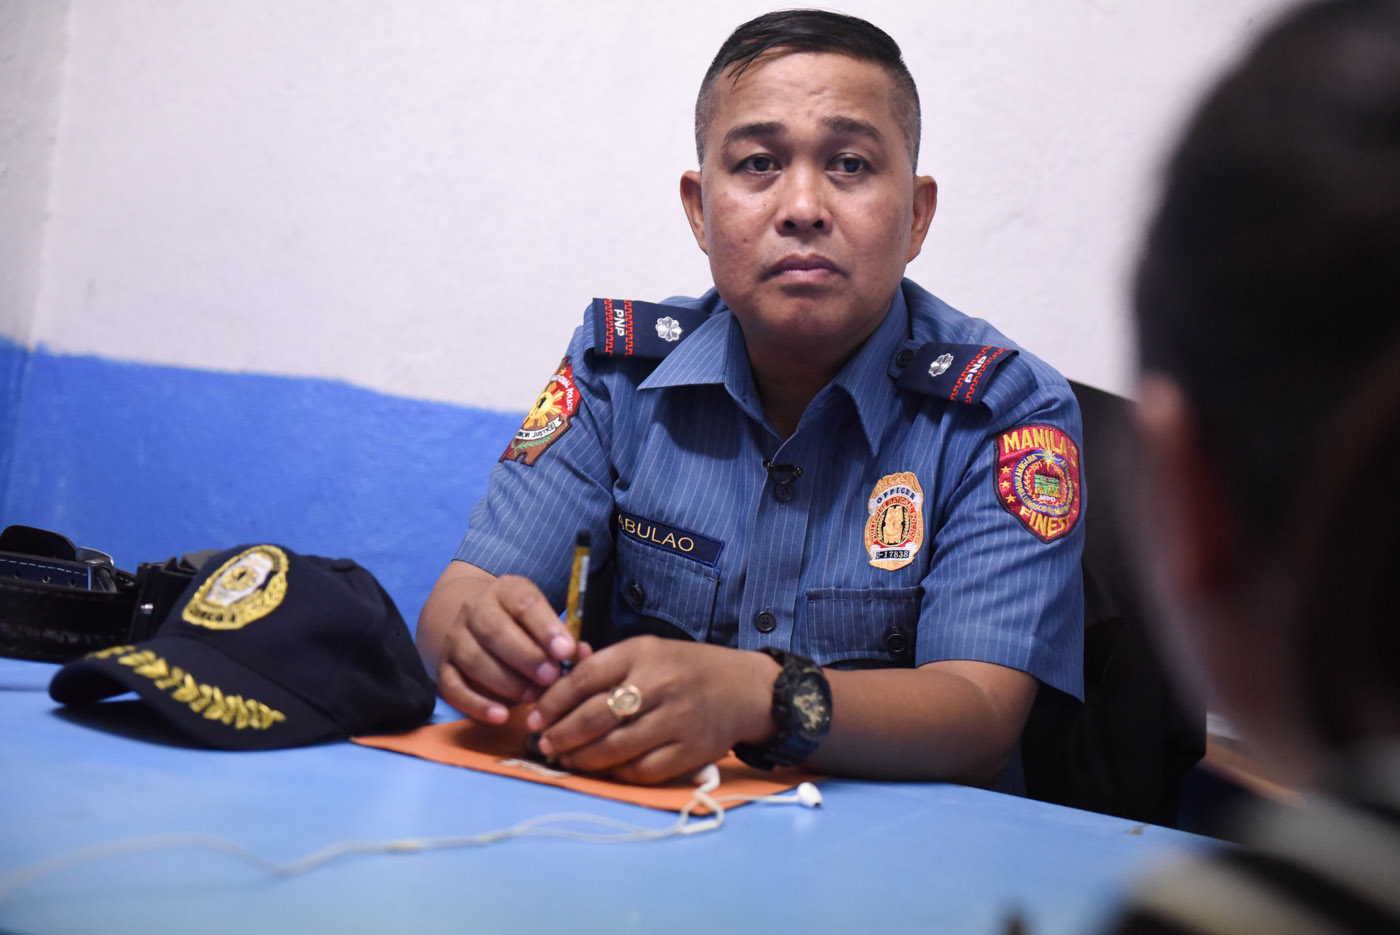 LISTEN TO OUR SIDE. Police Chief Superintendent Paul Sabulao fully supports President Rodrigo Duterte's directive to suppress crime and illegal drugs. All photos by Alecs Ongcal/Rappler  